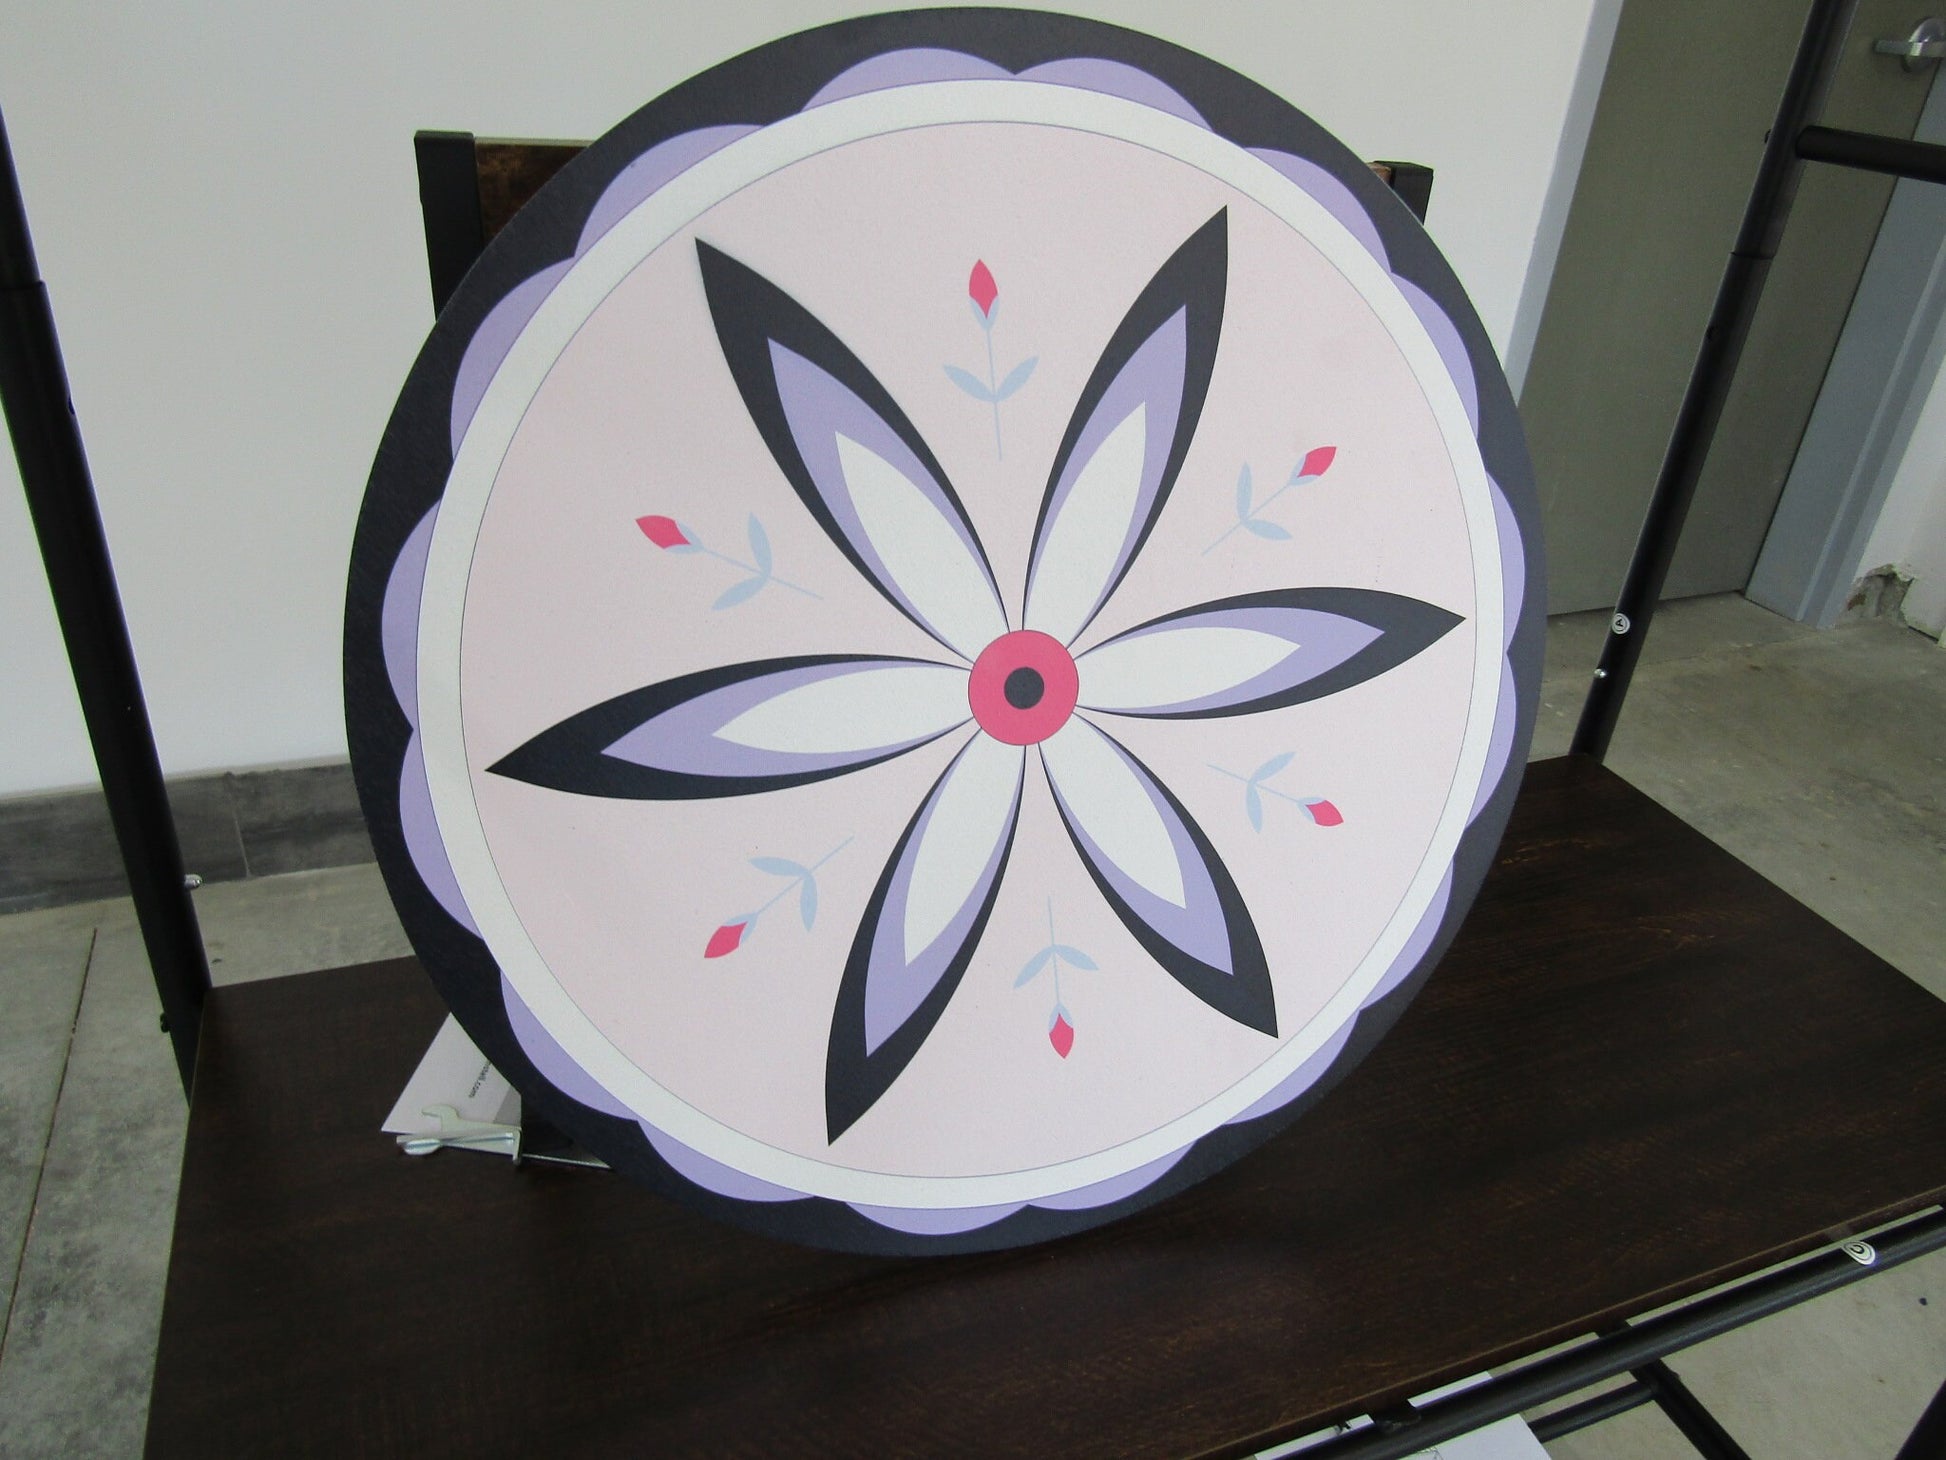 Round Unique Barn Quilt Floral Purple Circle Printed Image UVprinted On Wood Wooden Sign Geometric Shape Image Rustic Primitive Large